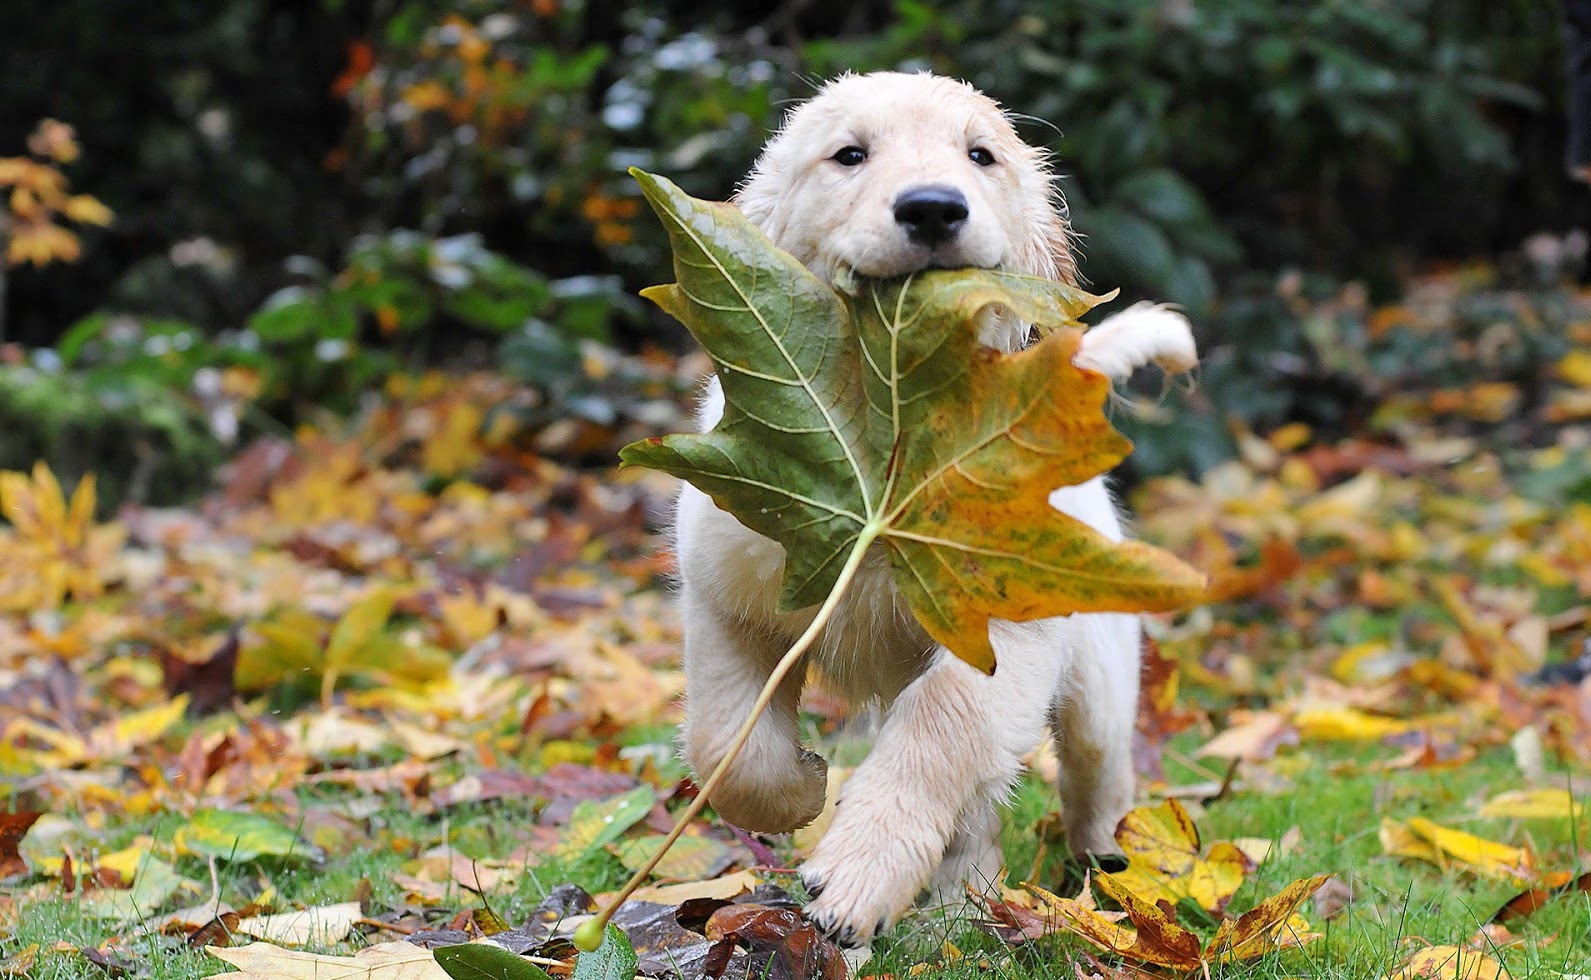 autumn-wallpaper-with-golden-retriever-and-leaves-barbaradashwallpapers.com_.jpg